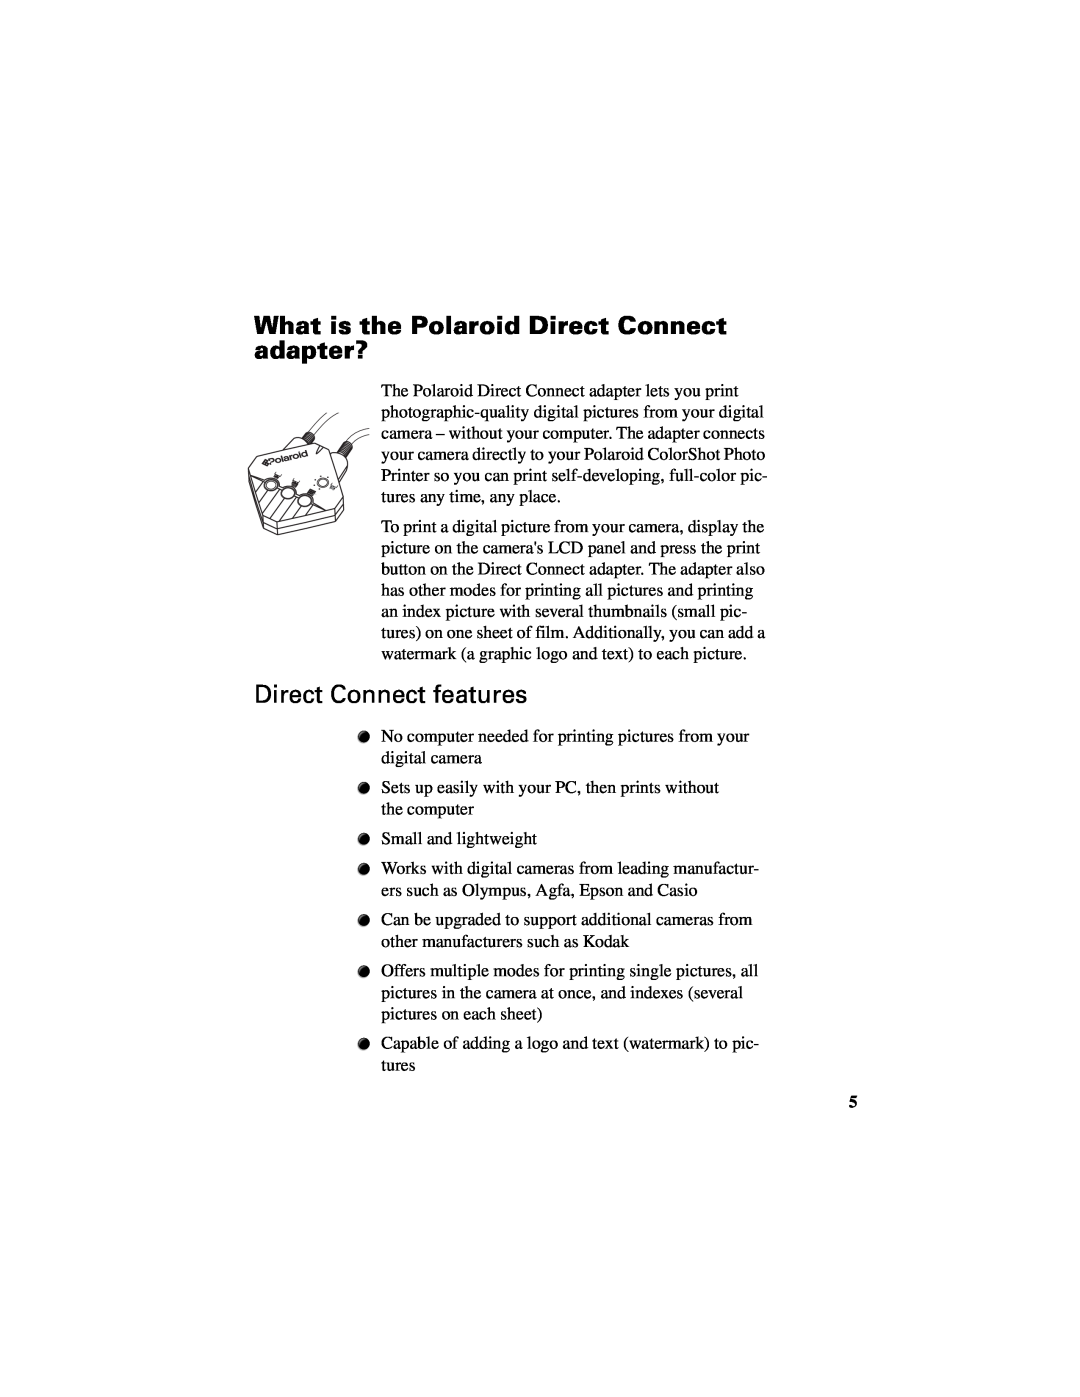 Polaroid Direct Connect Adapter manual What is the Polaroid Direct Connect adapter?, Direct Connect features 